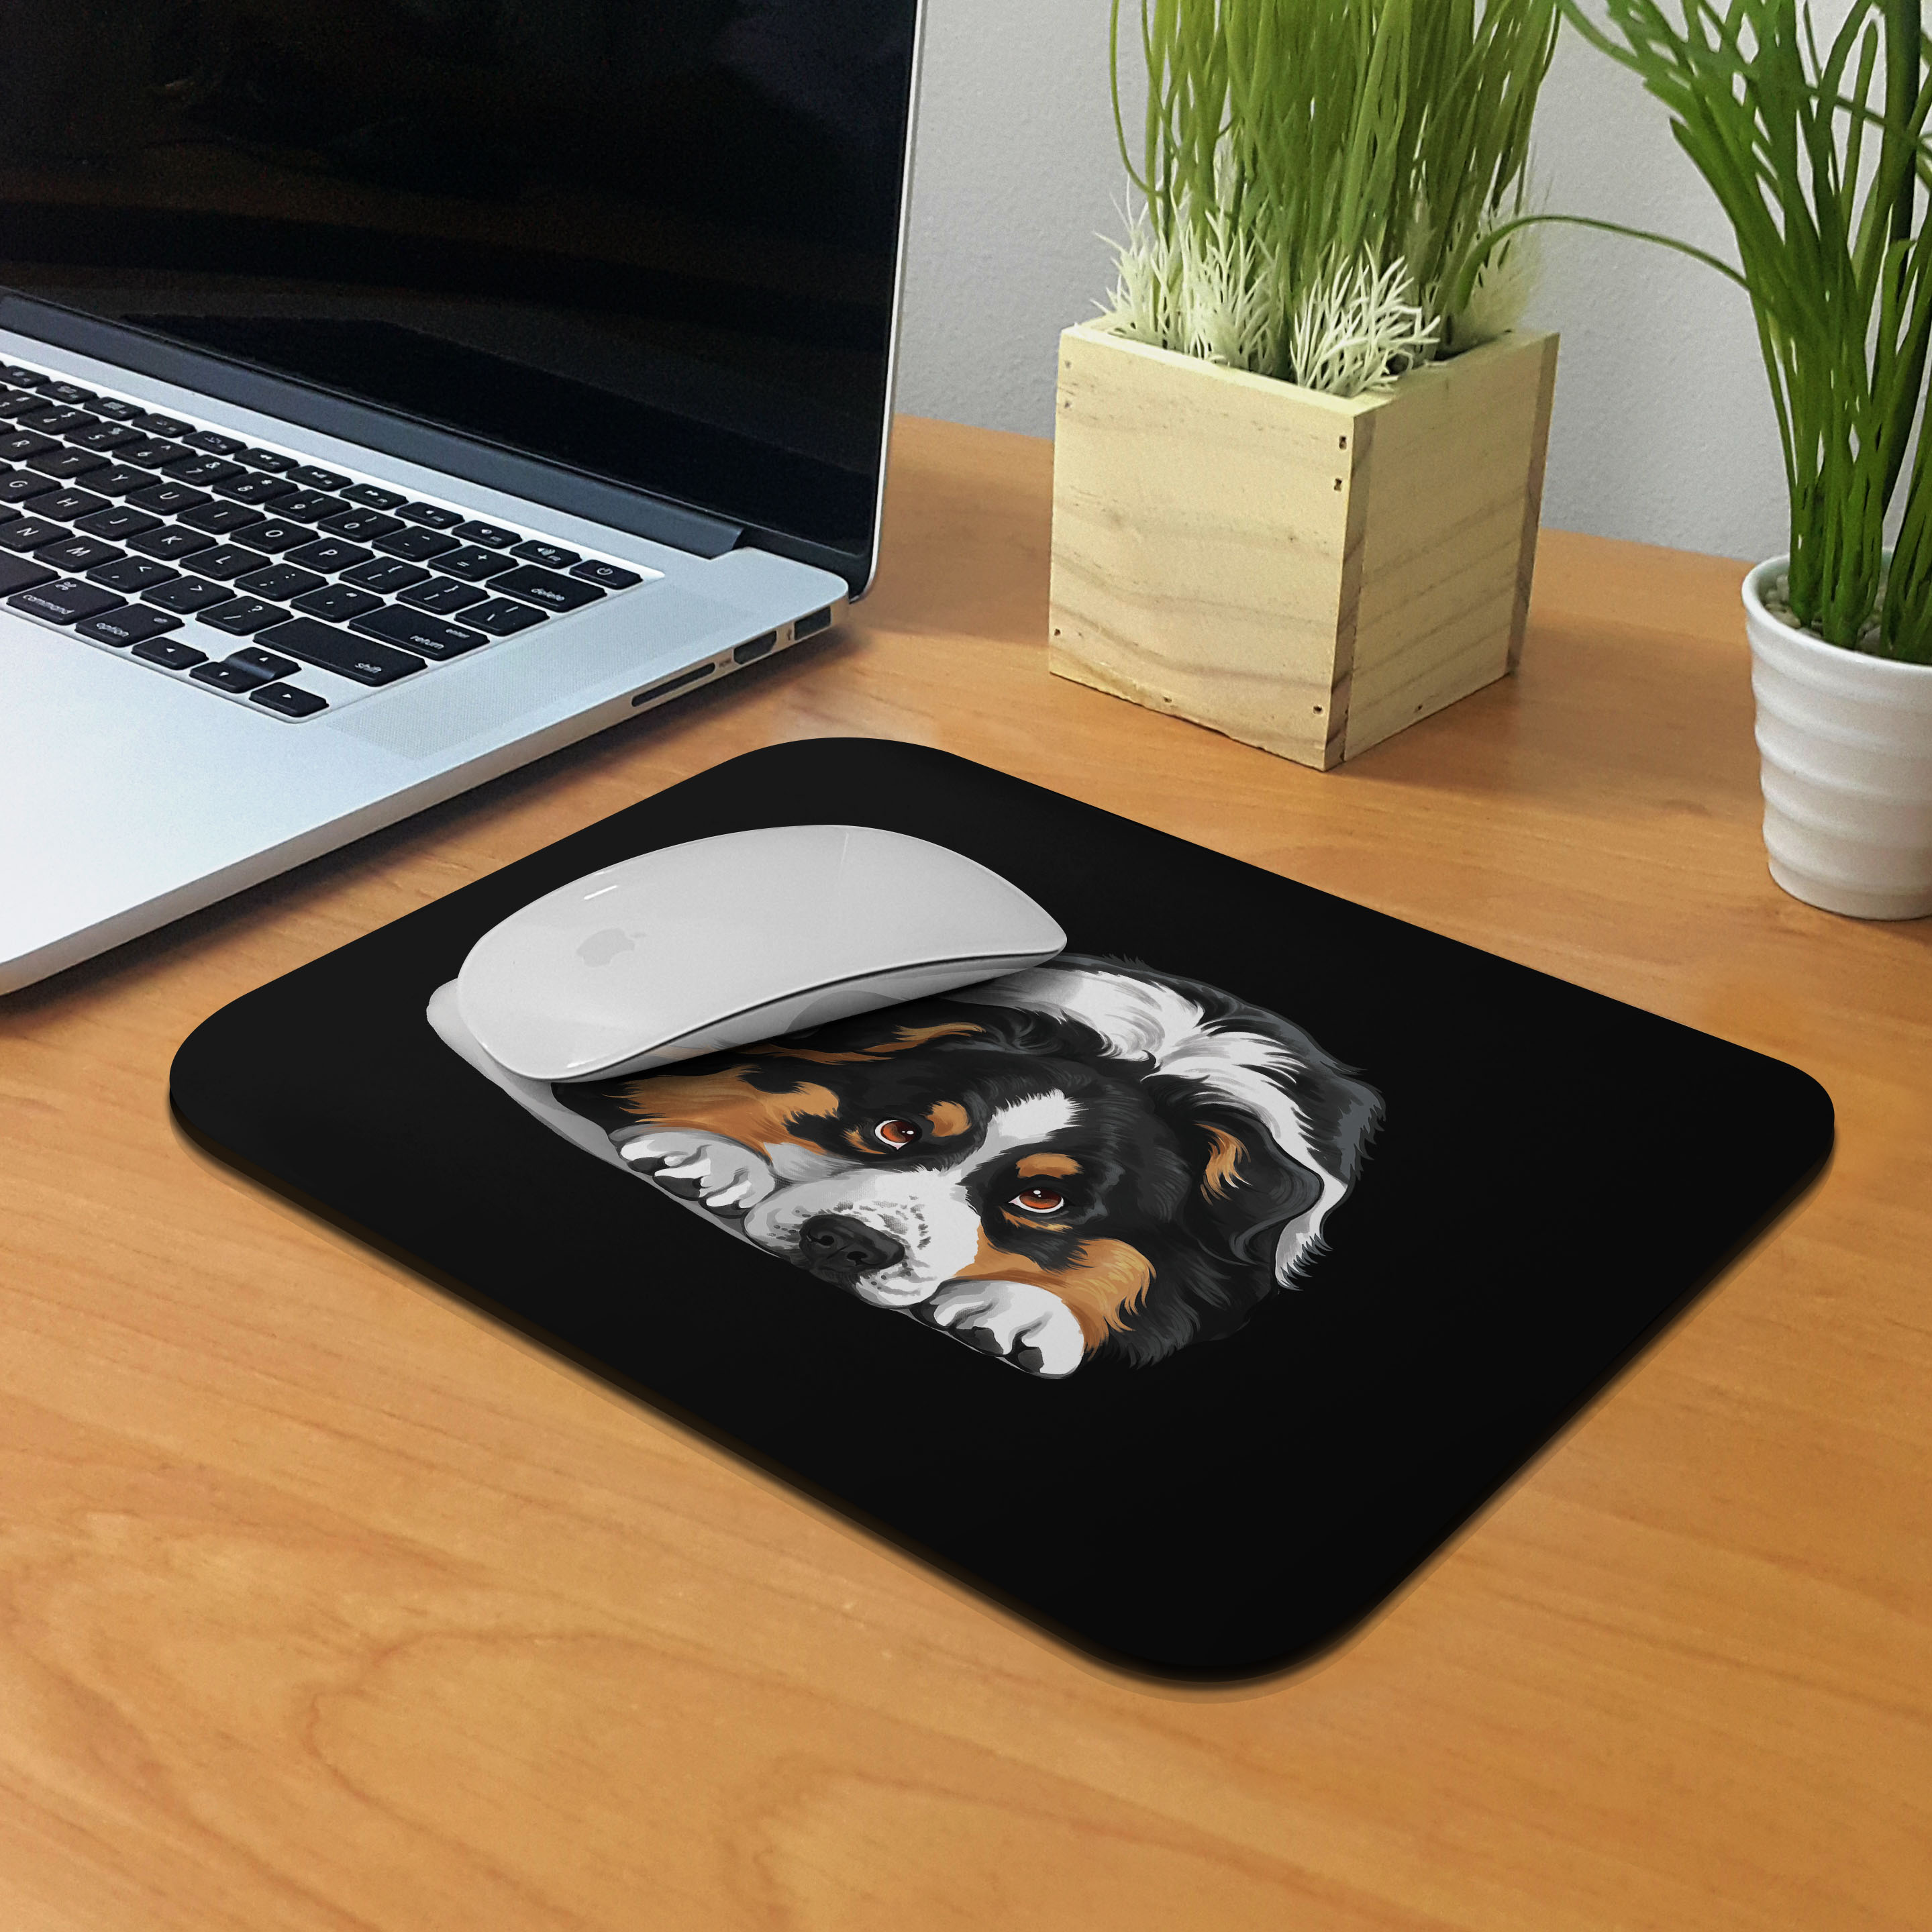 WIRESTER Rectangle Standard Mouse Pad, Non-Slip Mouse Pad for Home, Office, and Gaming Desk, Australian Shepherd Dog Lying Down Looking Up - image 5 of 5